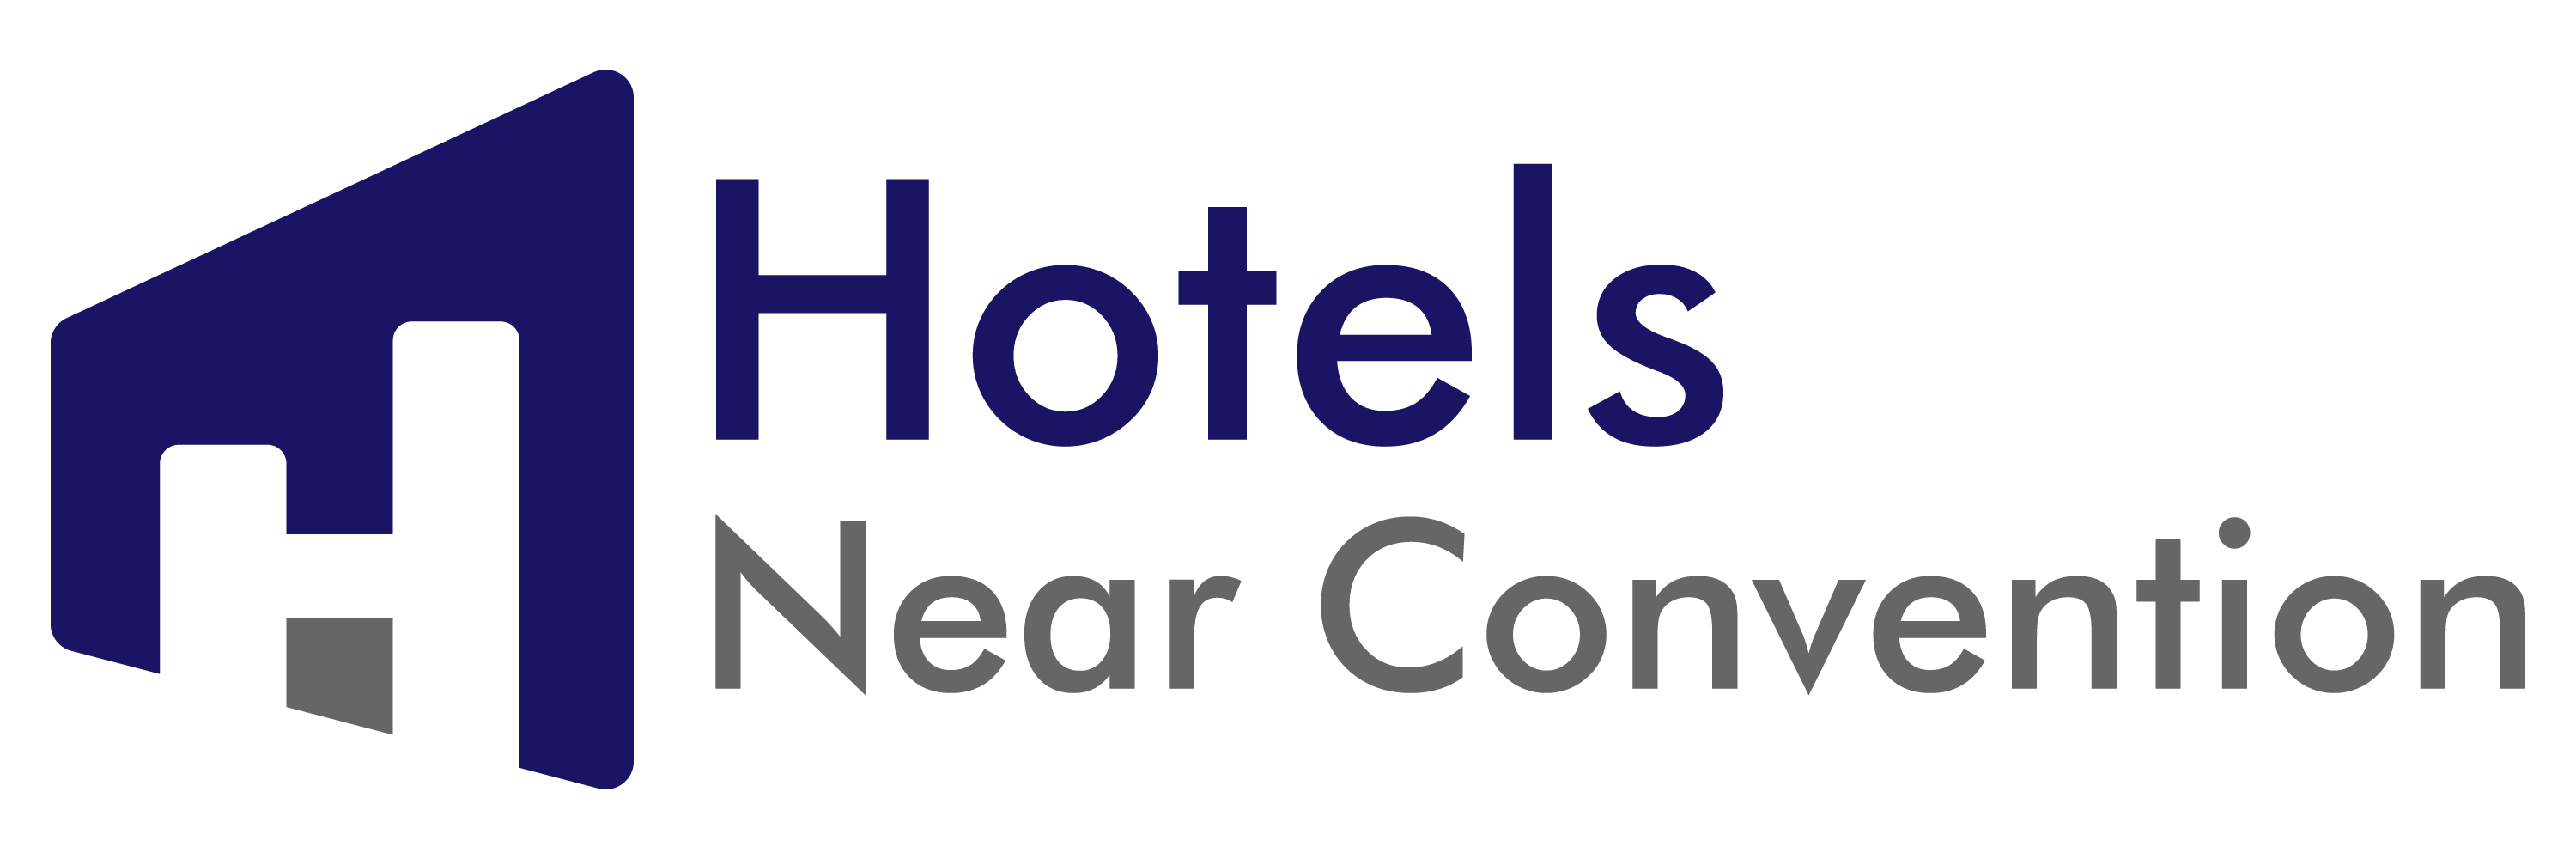 Hotels Near Conventions | Boston, MA - Hotels Near Conventions